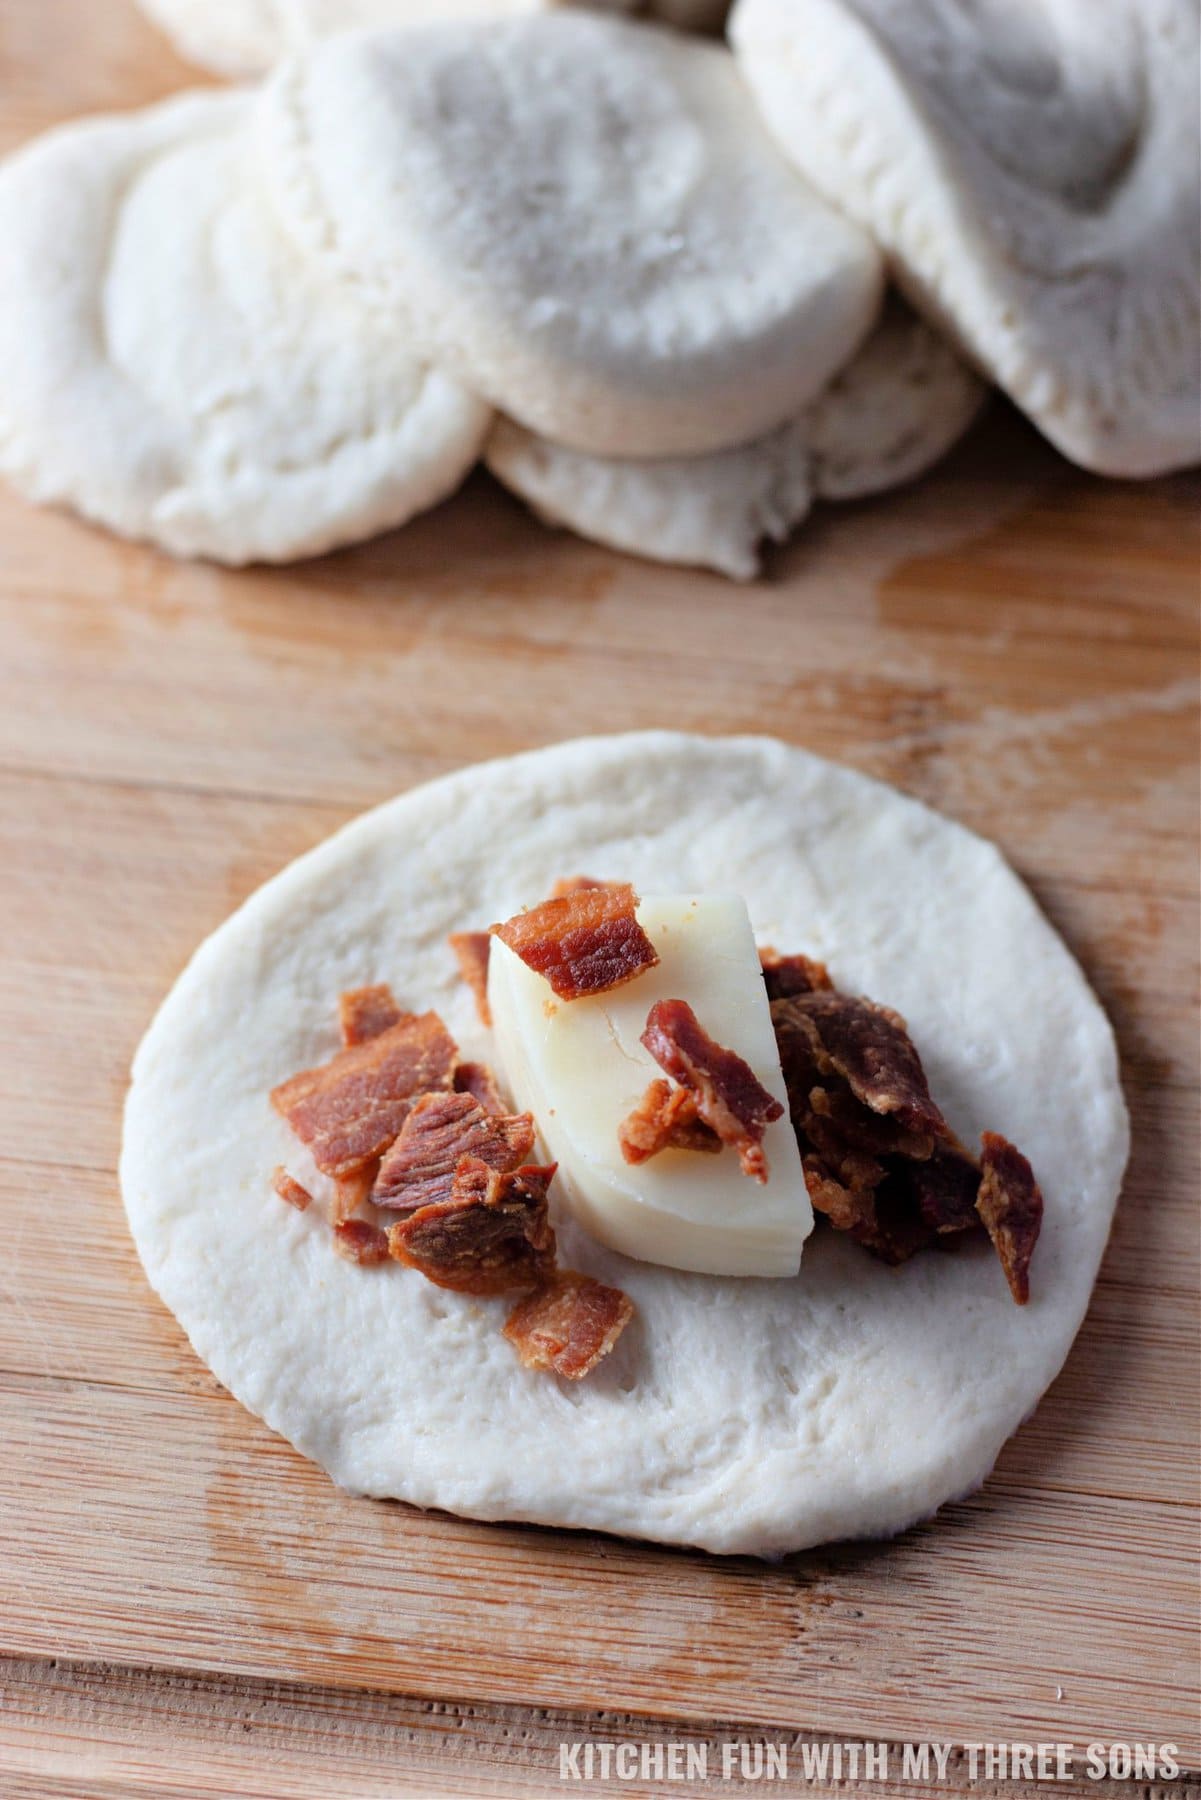 A small disc of biscuit dough topped with a piece of mozzarella cheese and crumbled bacon.